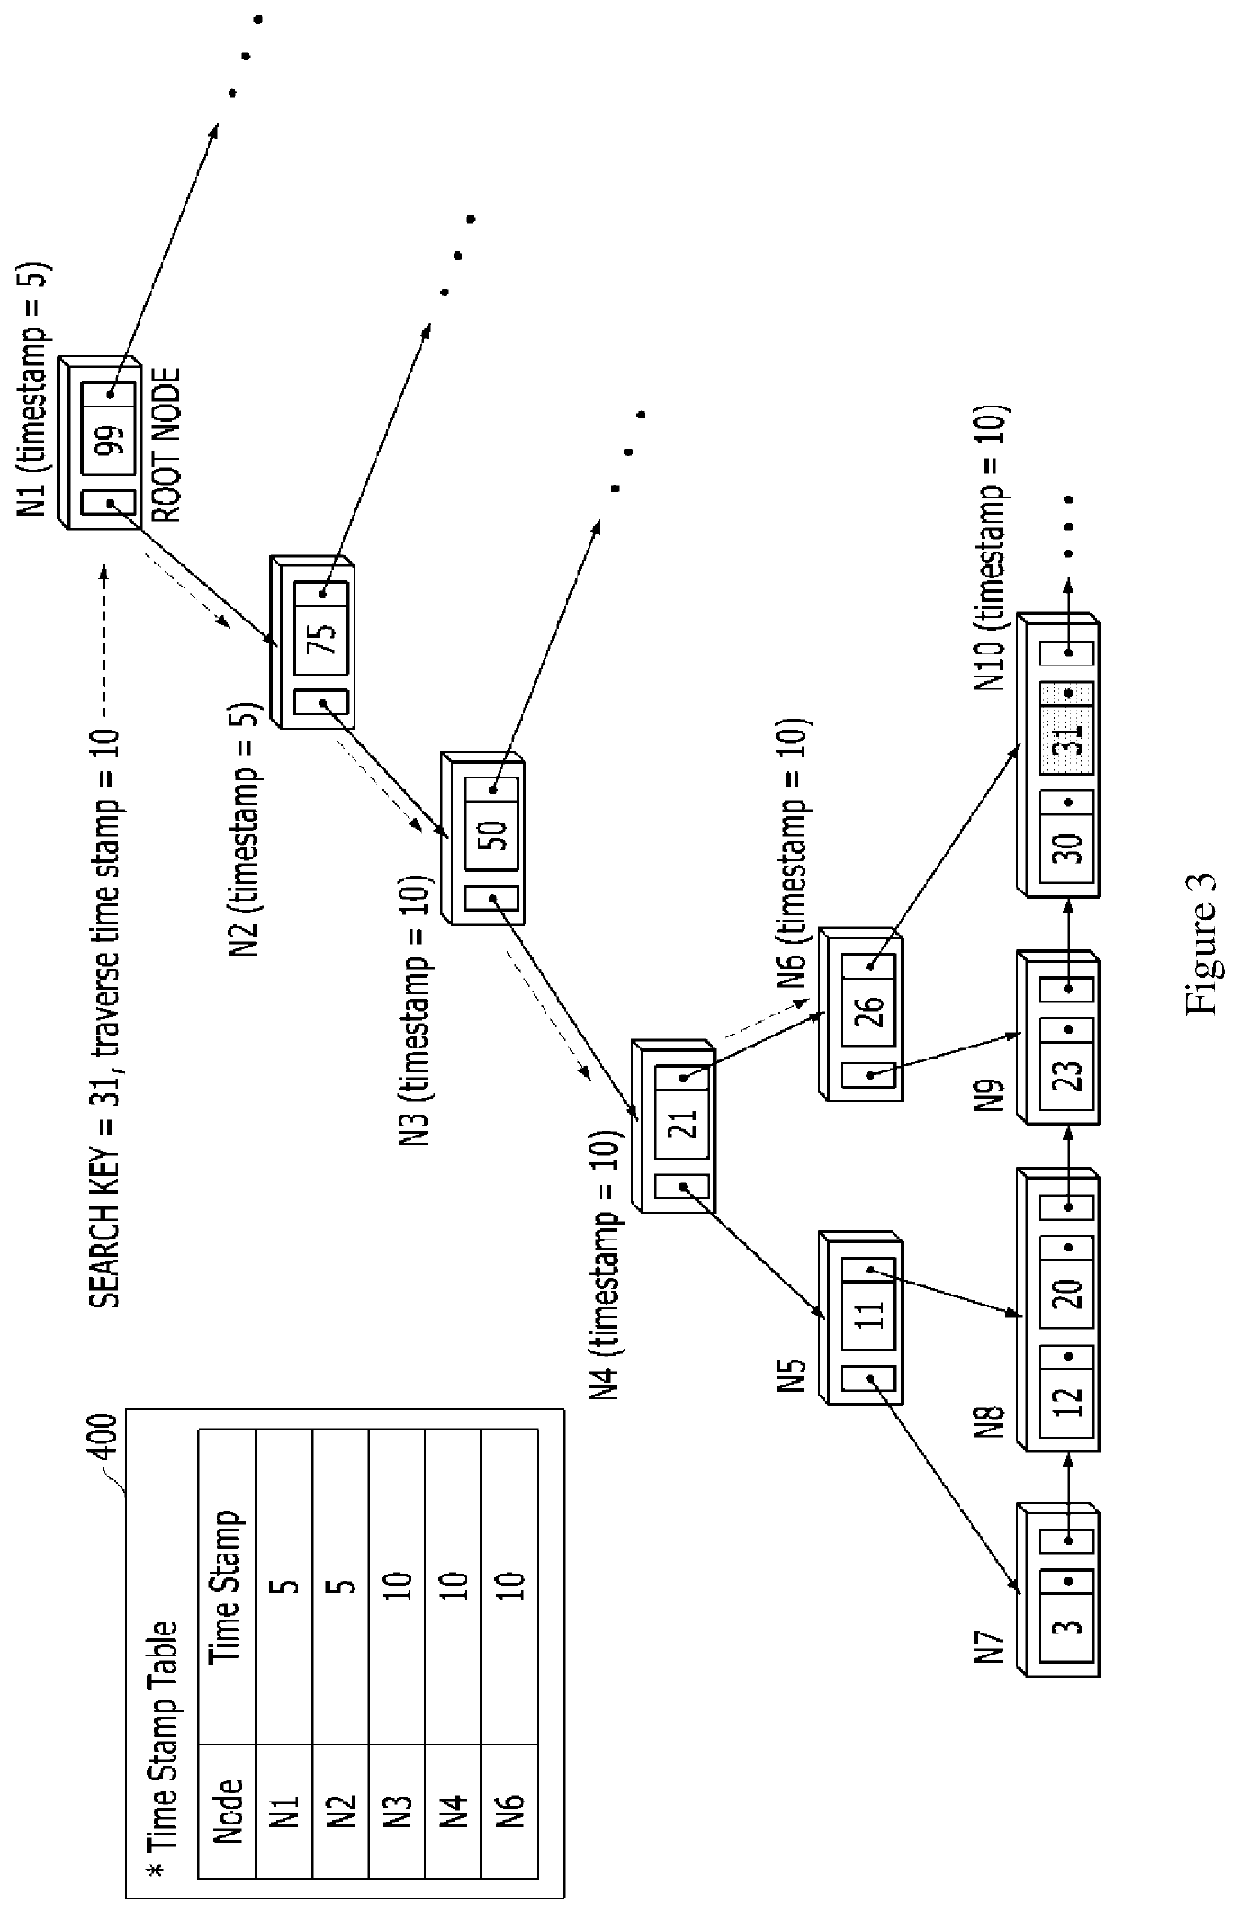 Systems and methods of managing an index